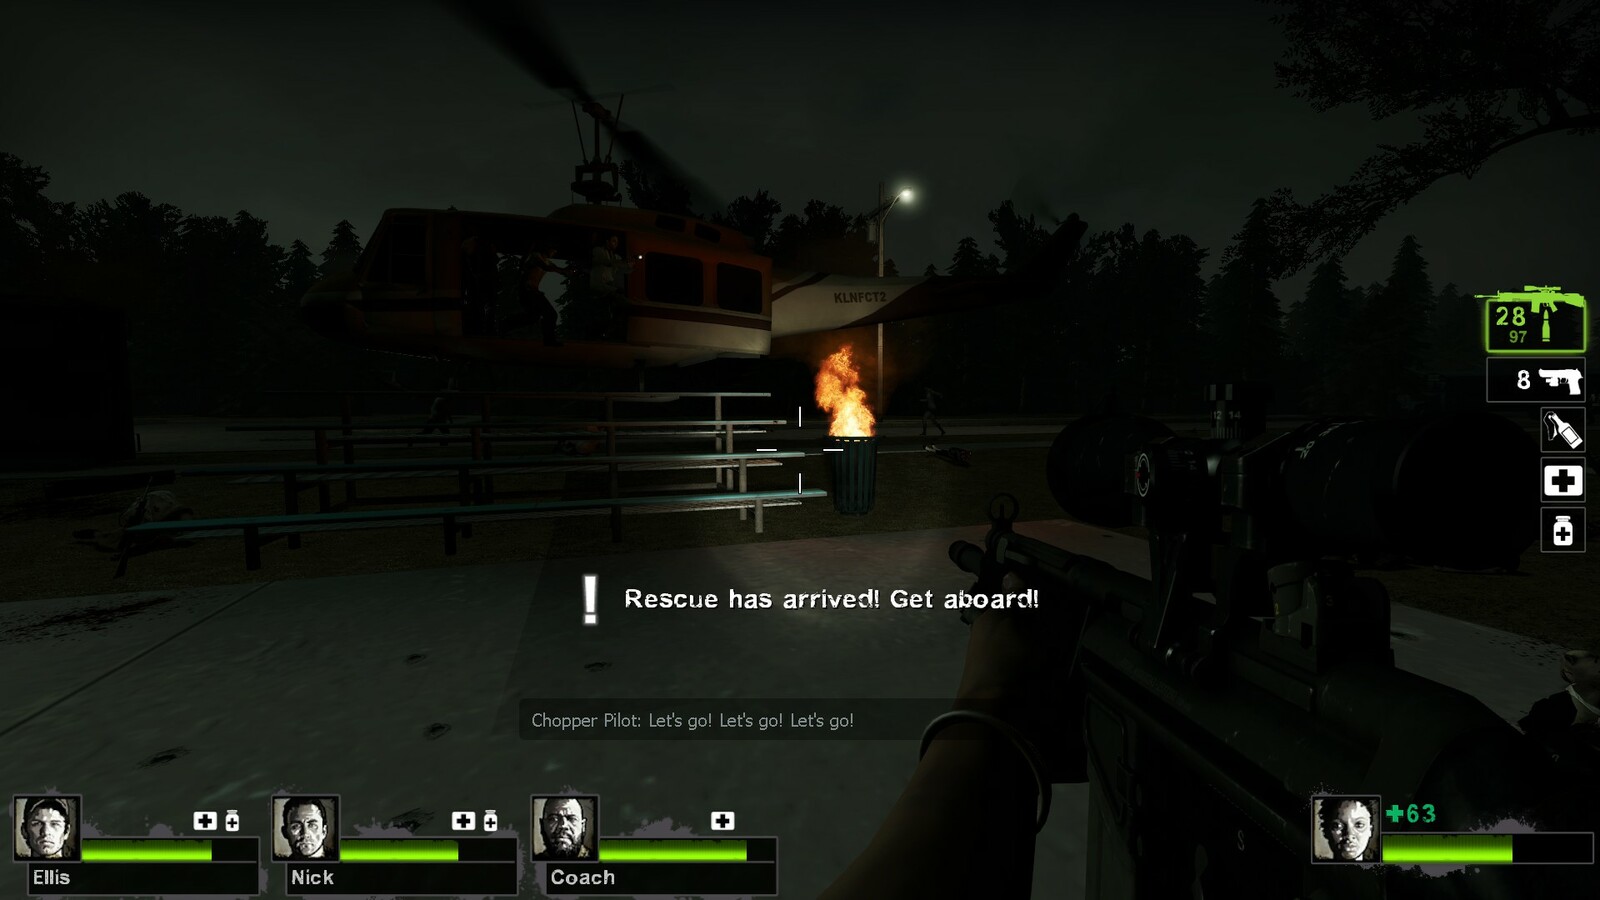 When rescue arrives via helicopter, players must enter to end the level and the campaign. 